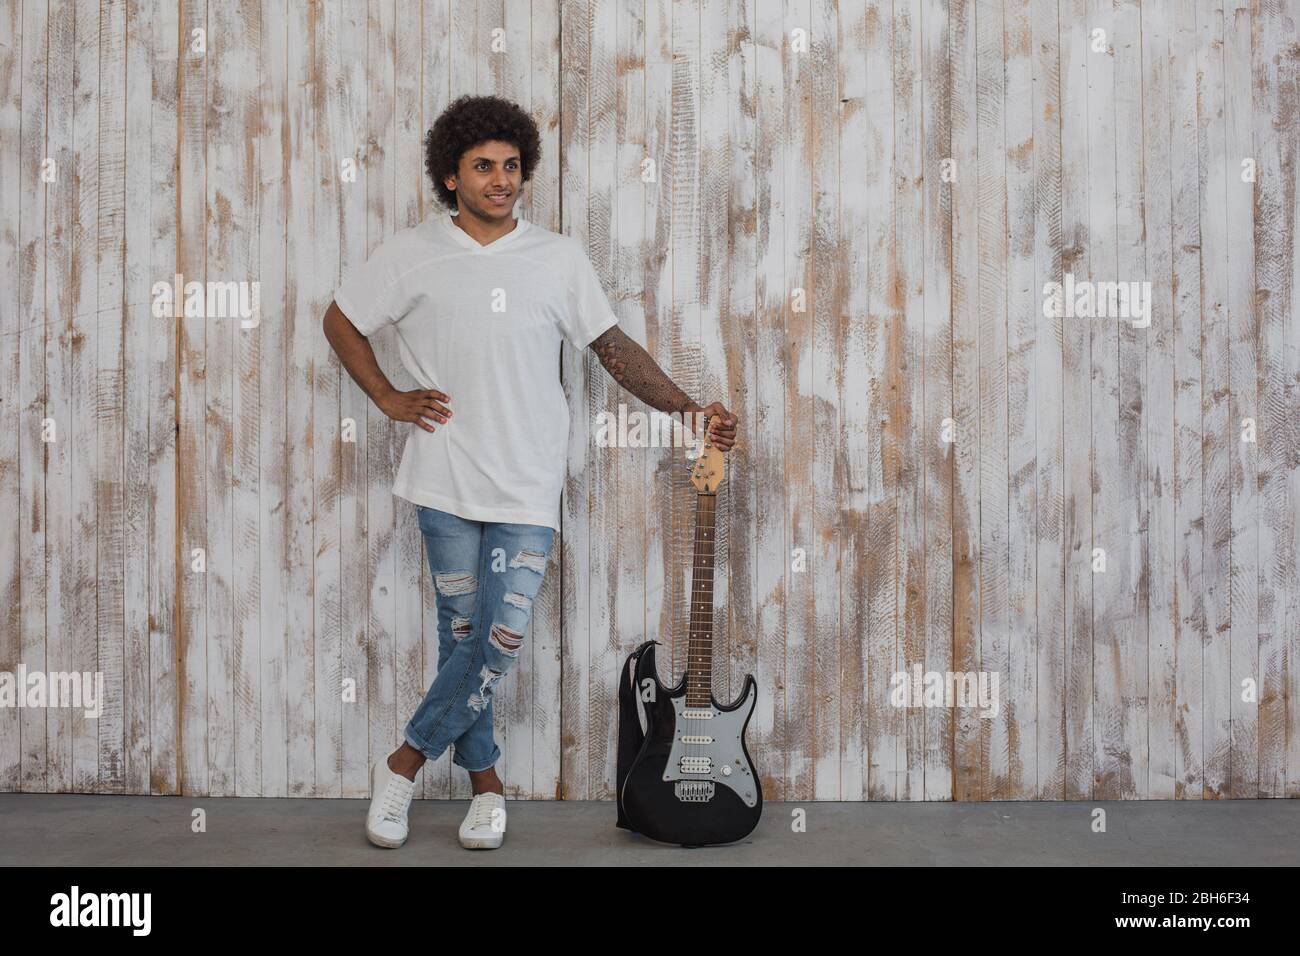 Creative person. Mulatto man musician, with curly hair stands near the bass guitar, against retro wooden wall Stock Photo